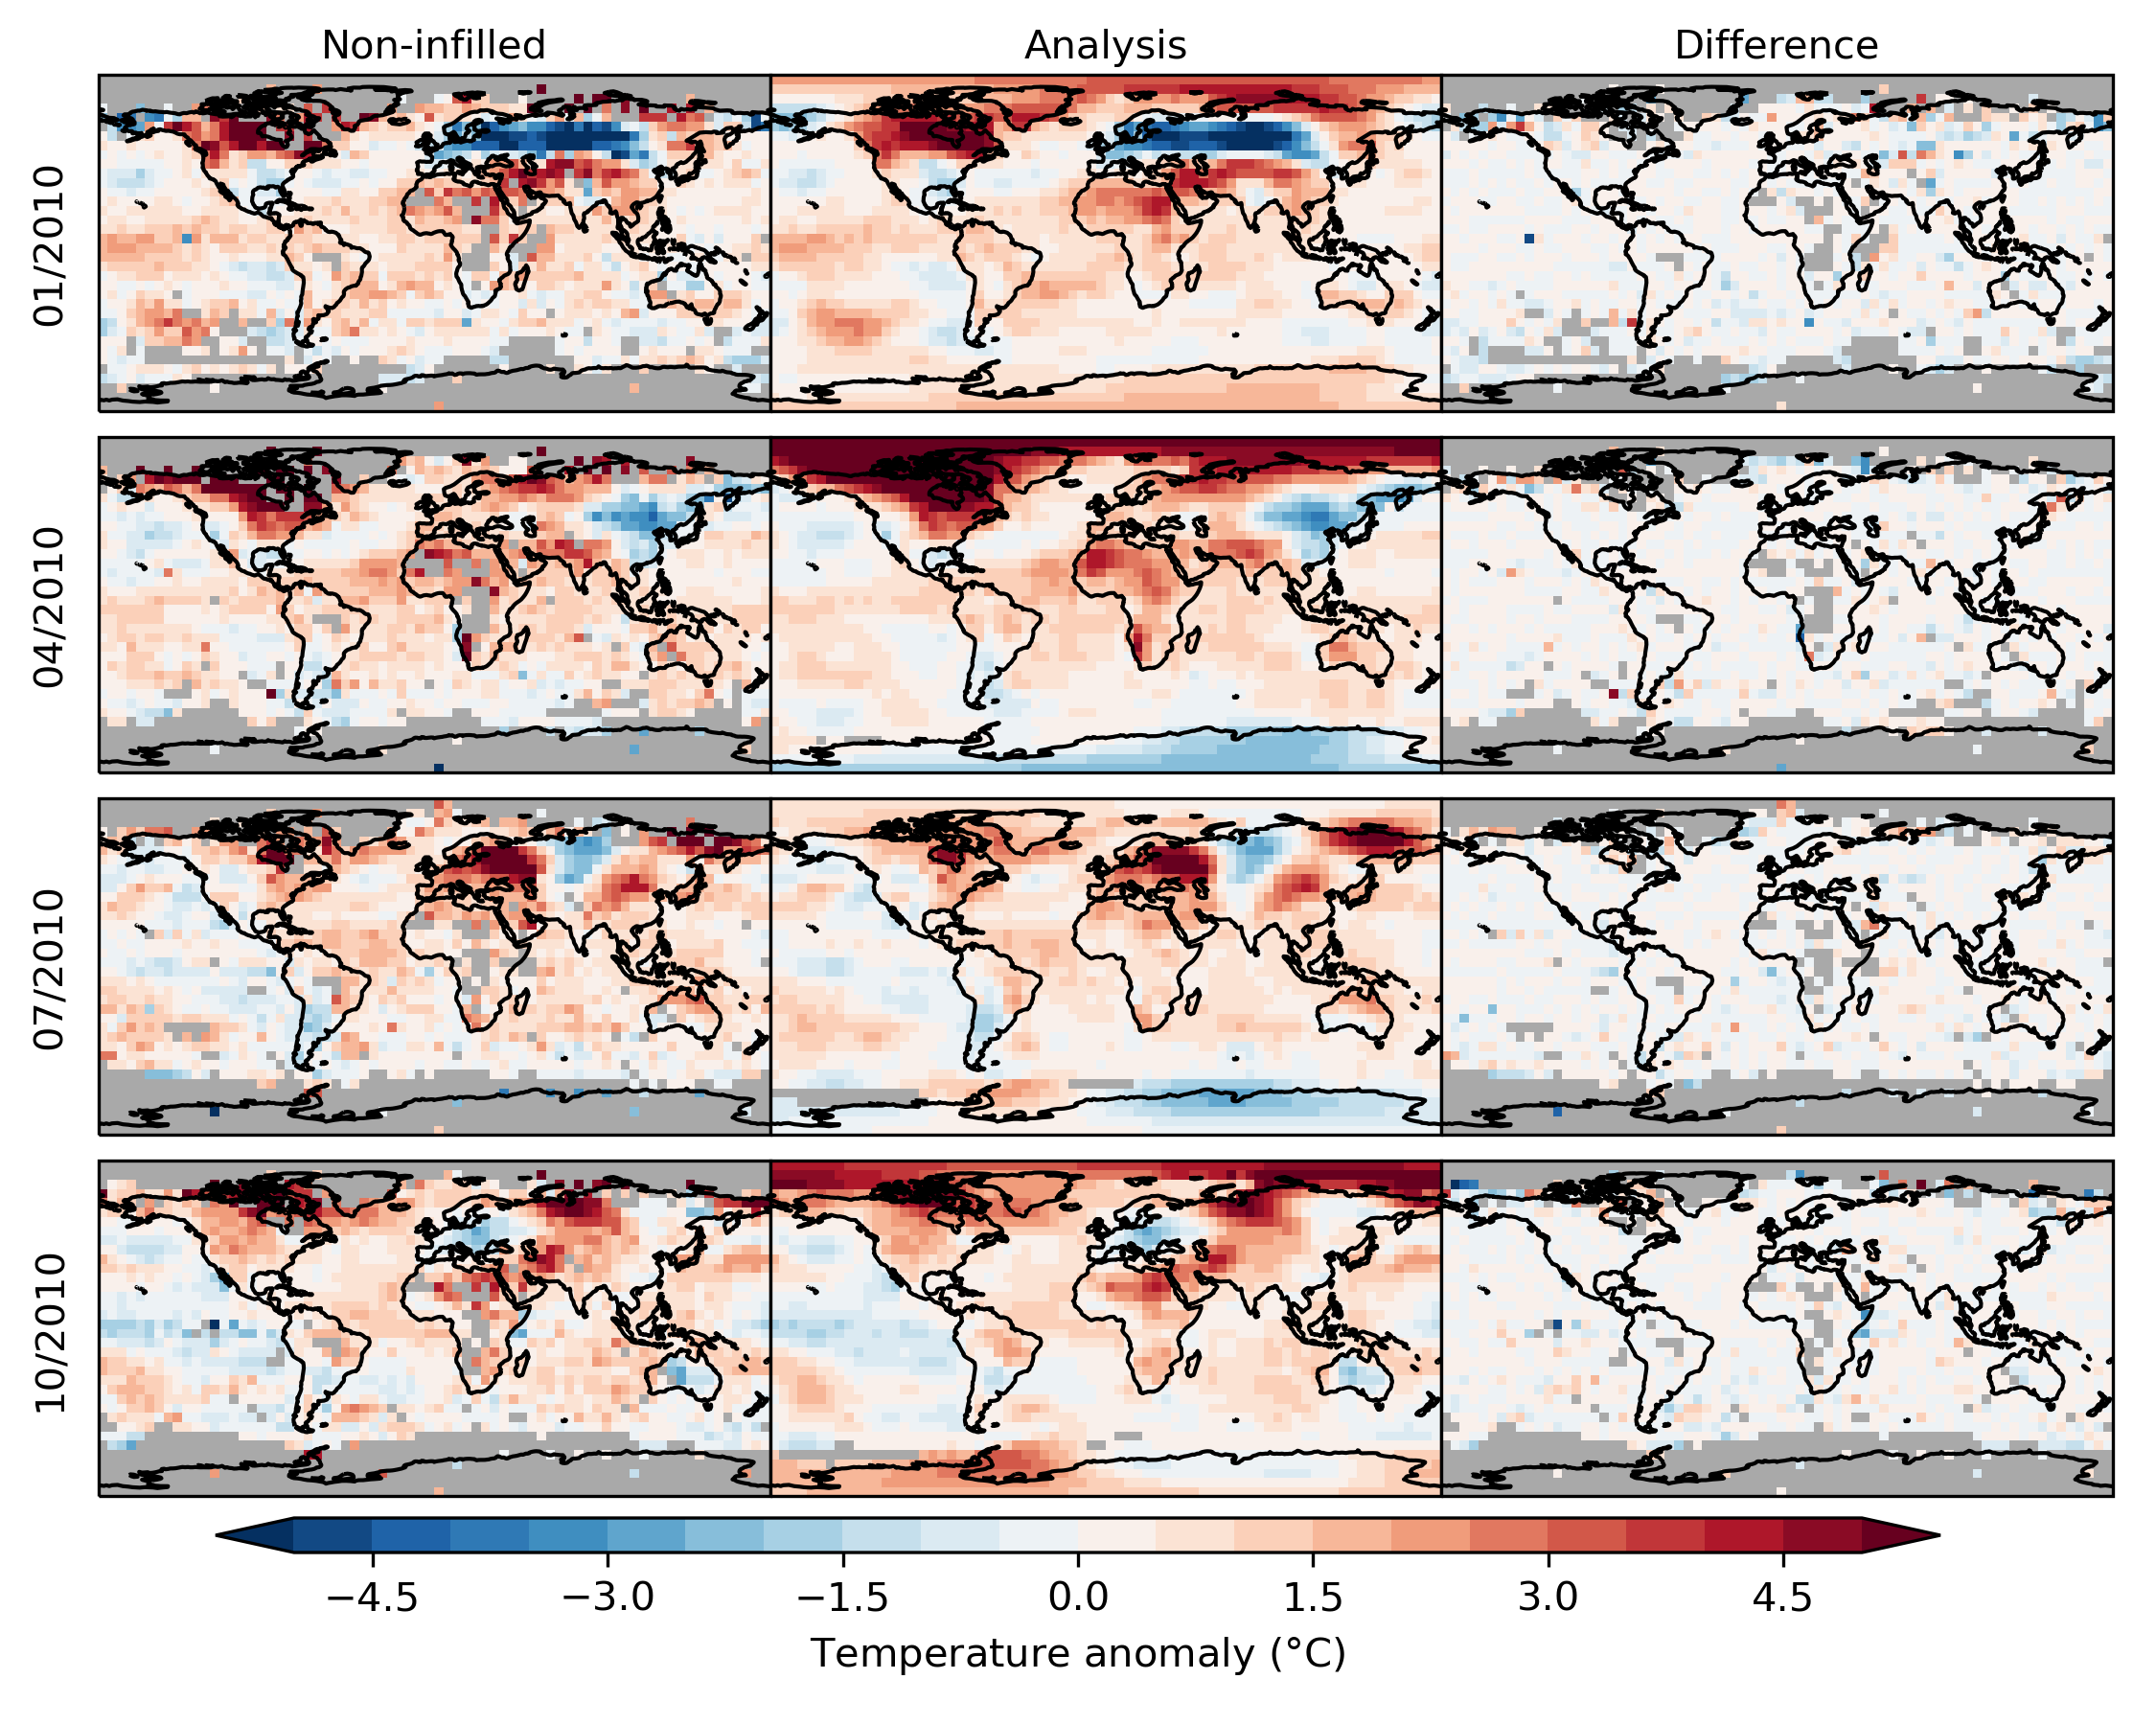 Maps showing near-surface temperature anomalies (temperature difference from the 1961-1990 average) for four months in 2010: January, April, July and October. The left column shows the non-infilled version of HadCRUT5 and the middle column shows the HadCRUT5 analysis. The right-hand column shows the difference between the two. Grey areas indicate grid cells for which temperatures have not been estimated due to lack of nearby data.